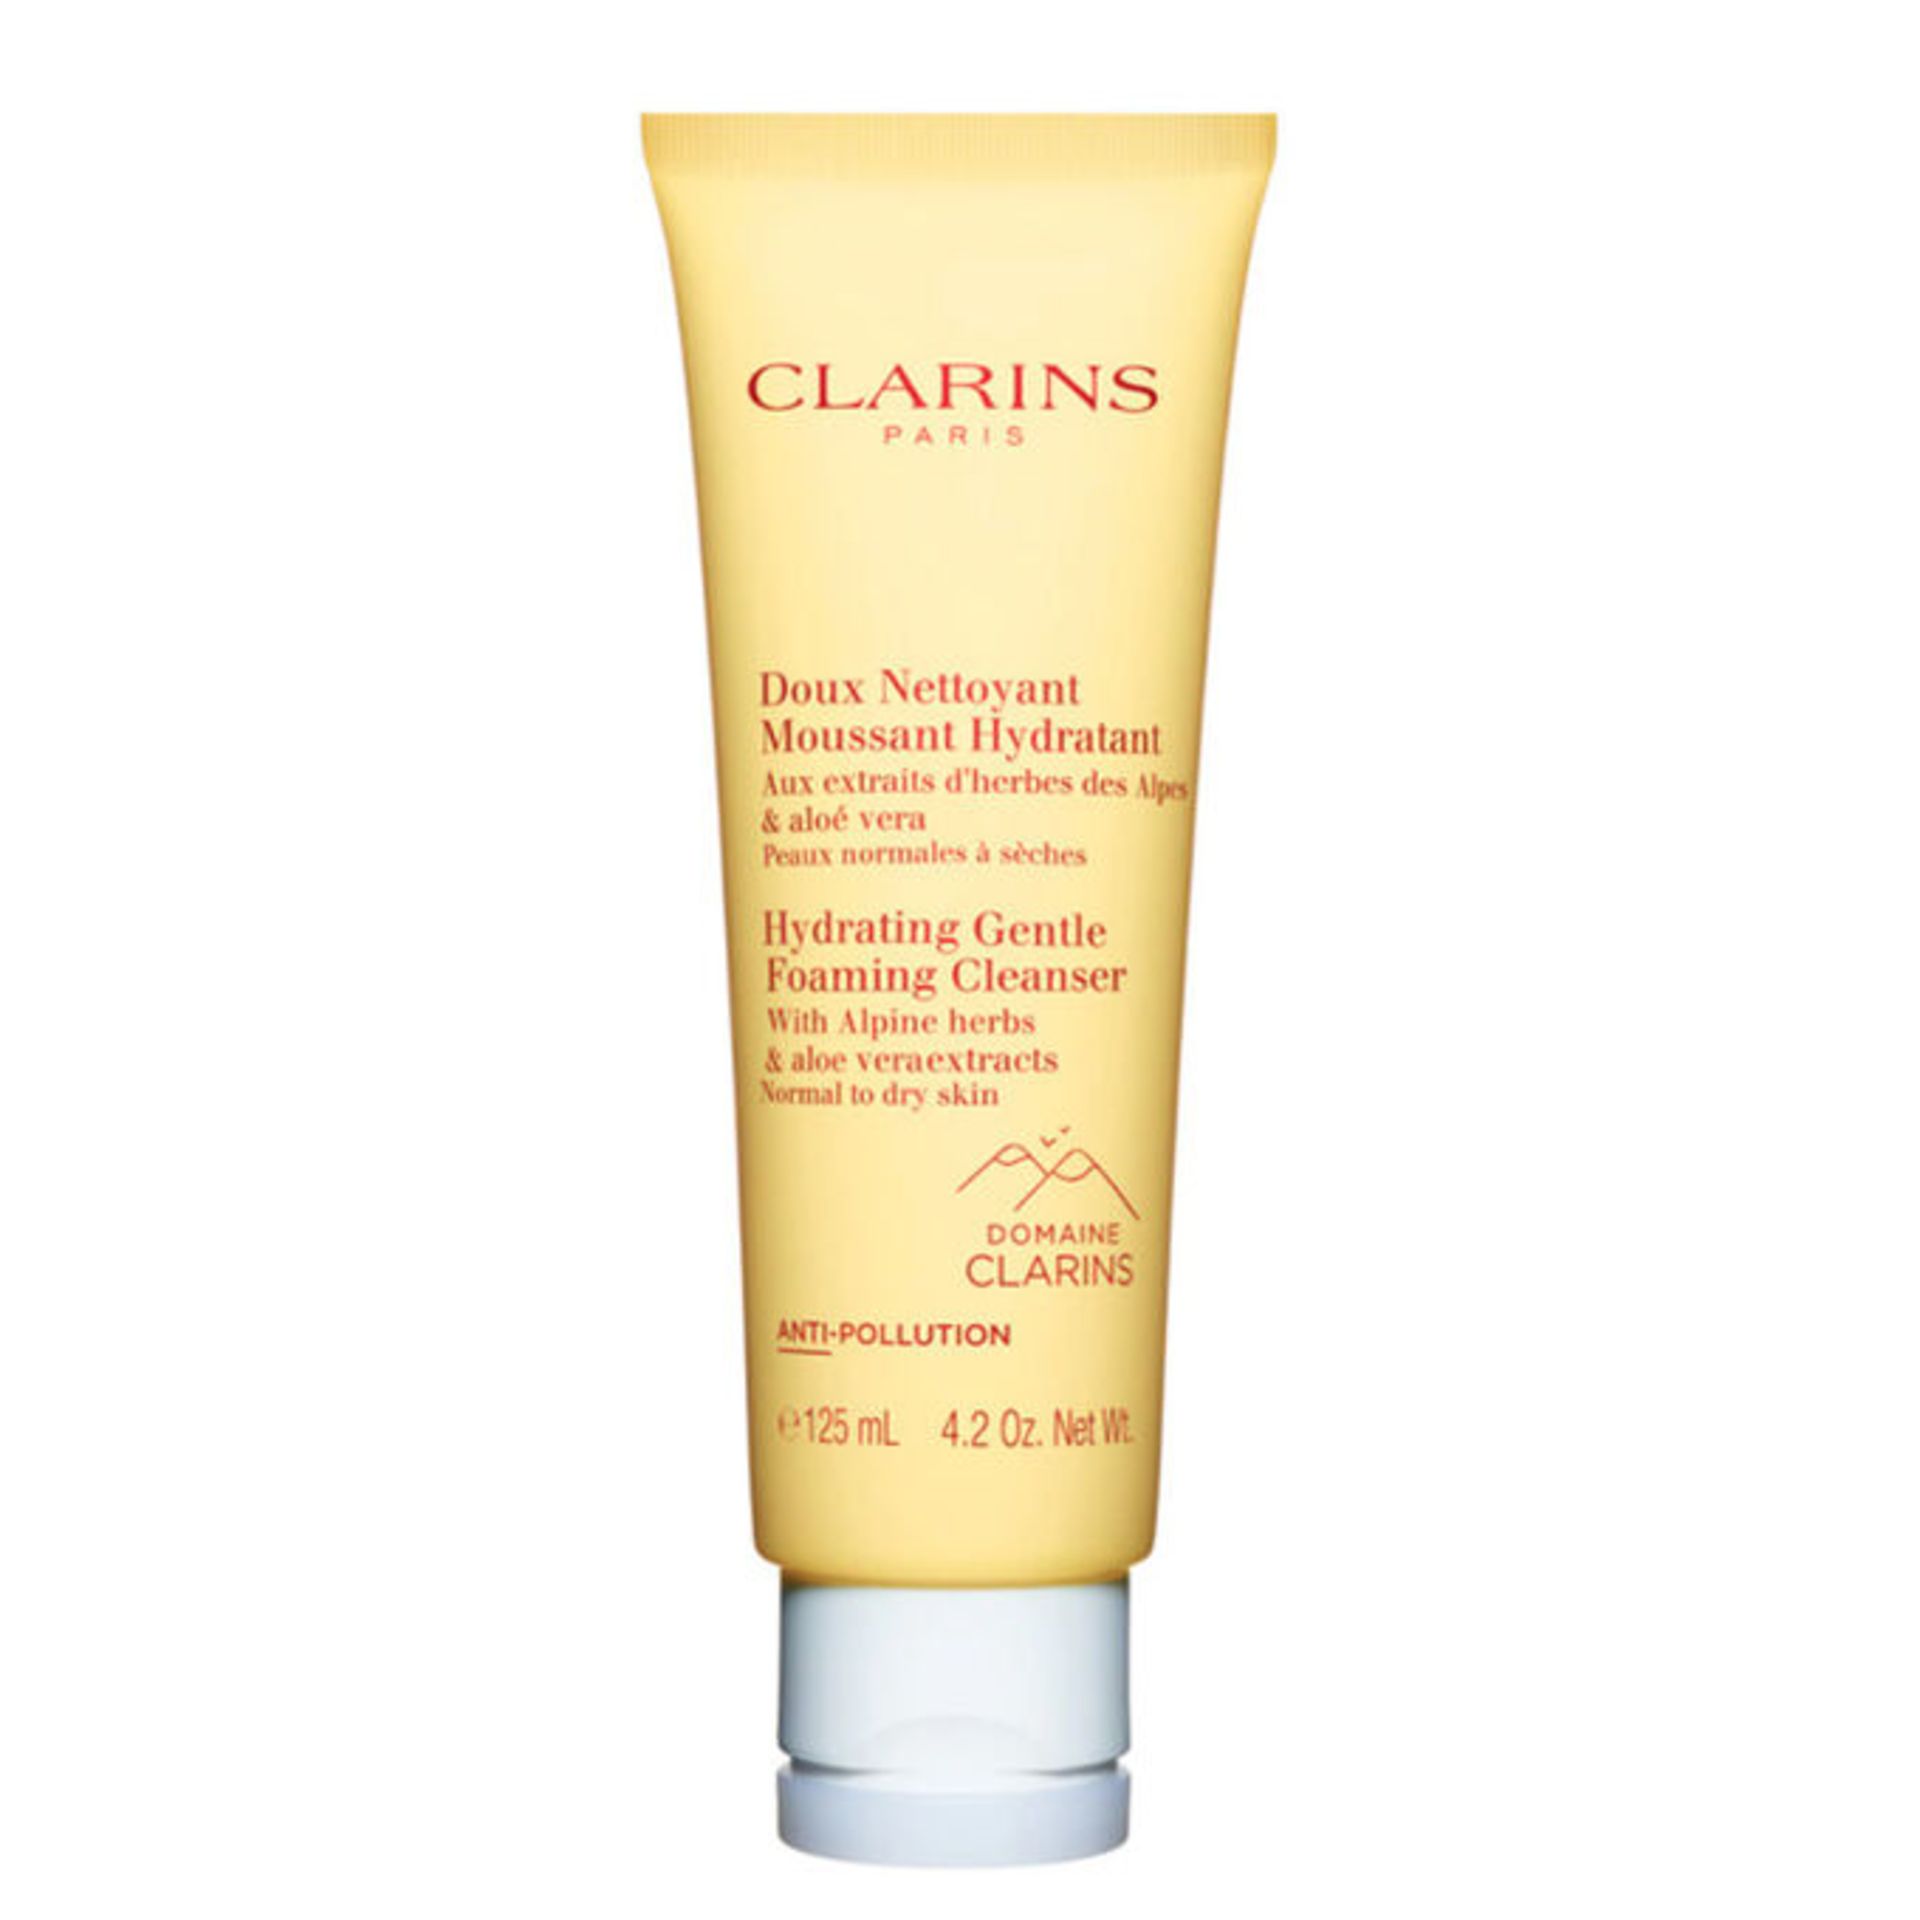 + VAT Brand New Clarins Hydrating Gentle Foam. Cleanser Nor. to Dry 125ml